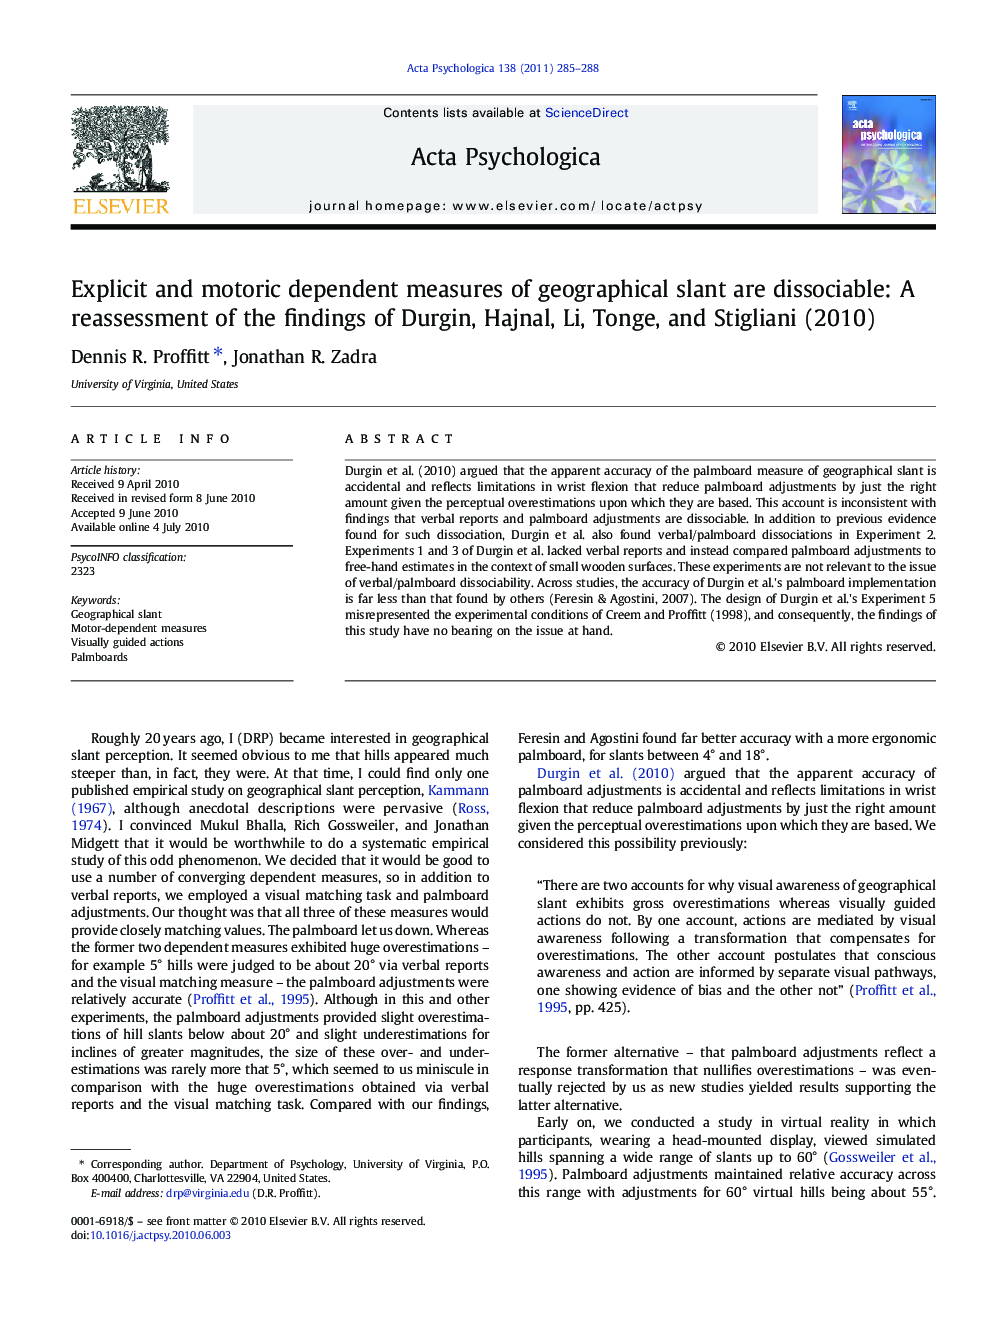 Explicit and motoric dependent measures of geographical slant are dissociable: A reassessment of the findings of Durgin, Hajnal, Li, Tonge, and Stigliani (2010)